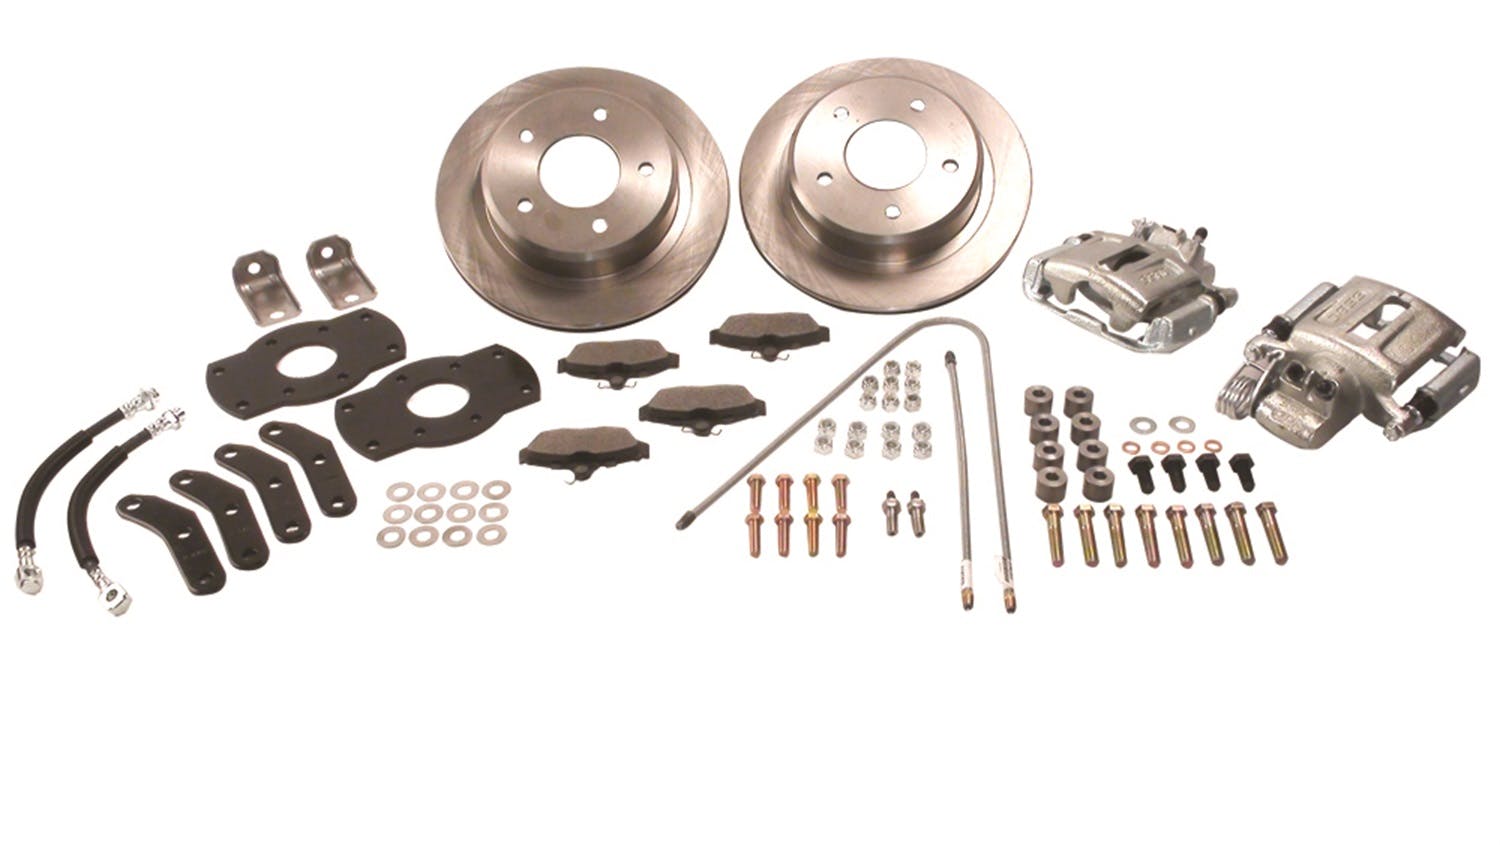 Stainless Steel Brakes A128BK Kit A128 w/black calipers